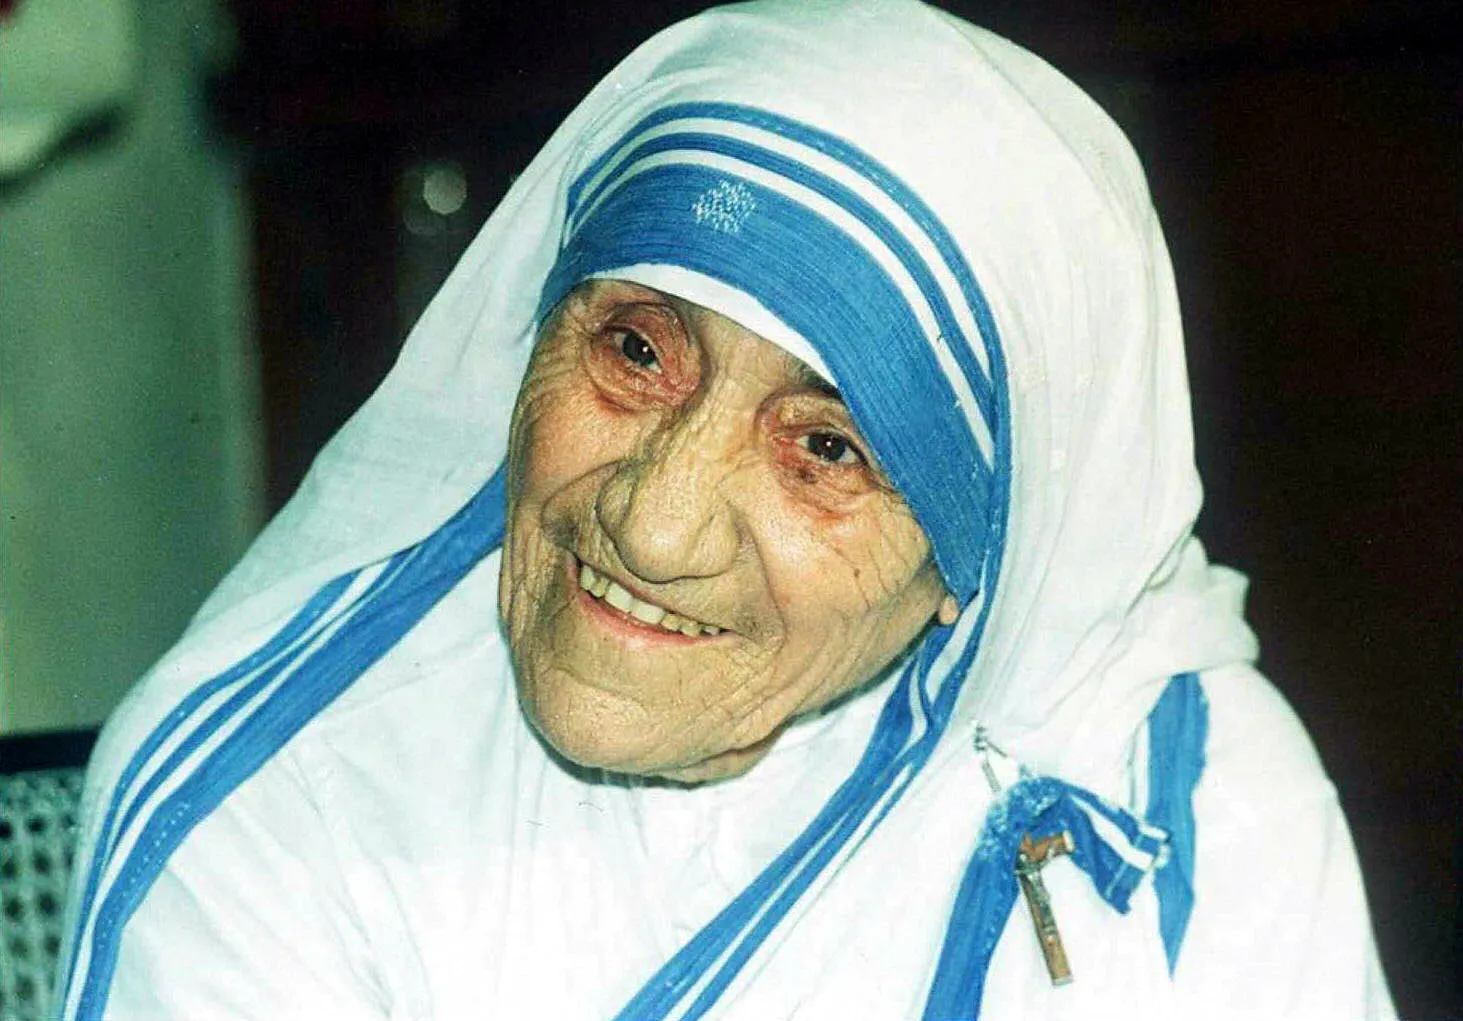 Mother Teresa smiles as she poses for photographers in Calcutta, India, on April 12, 1995.?w=200&h=150